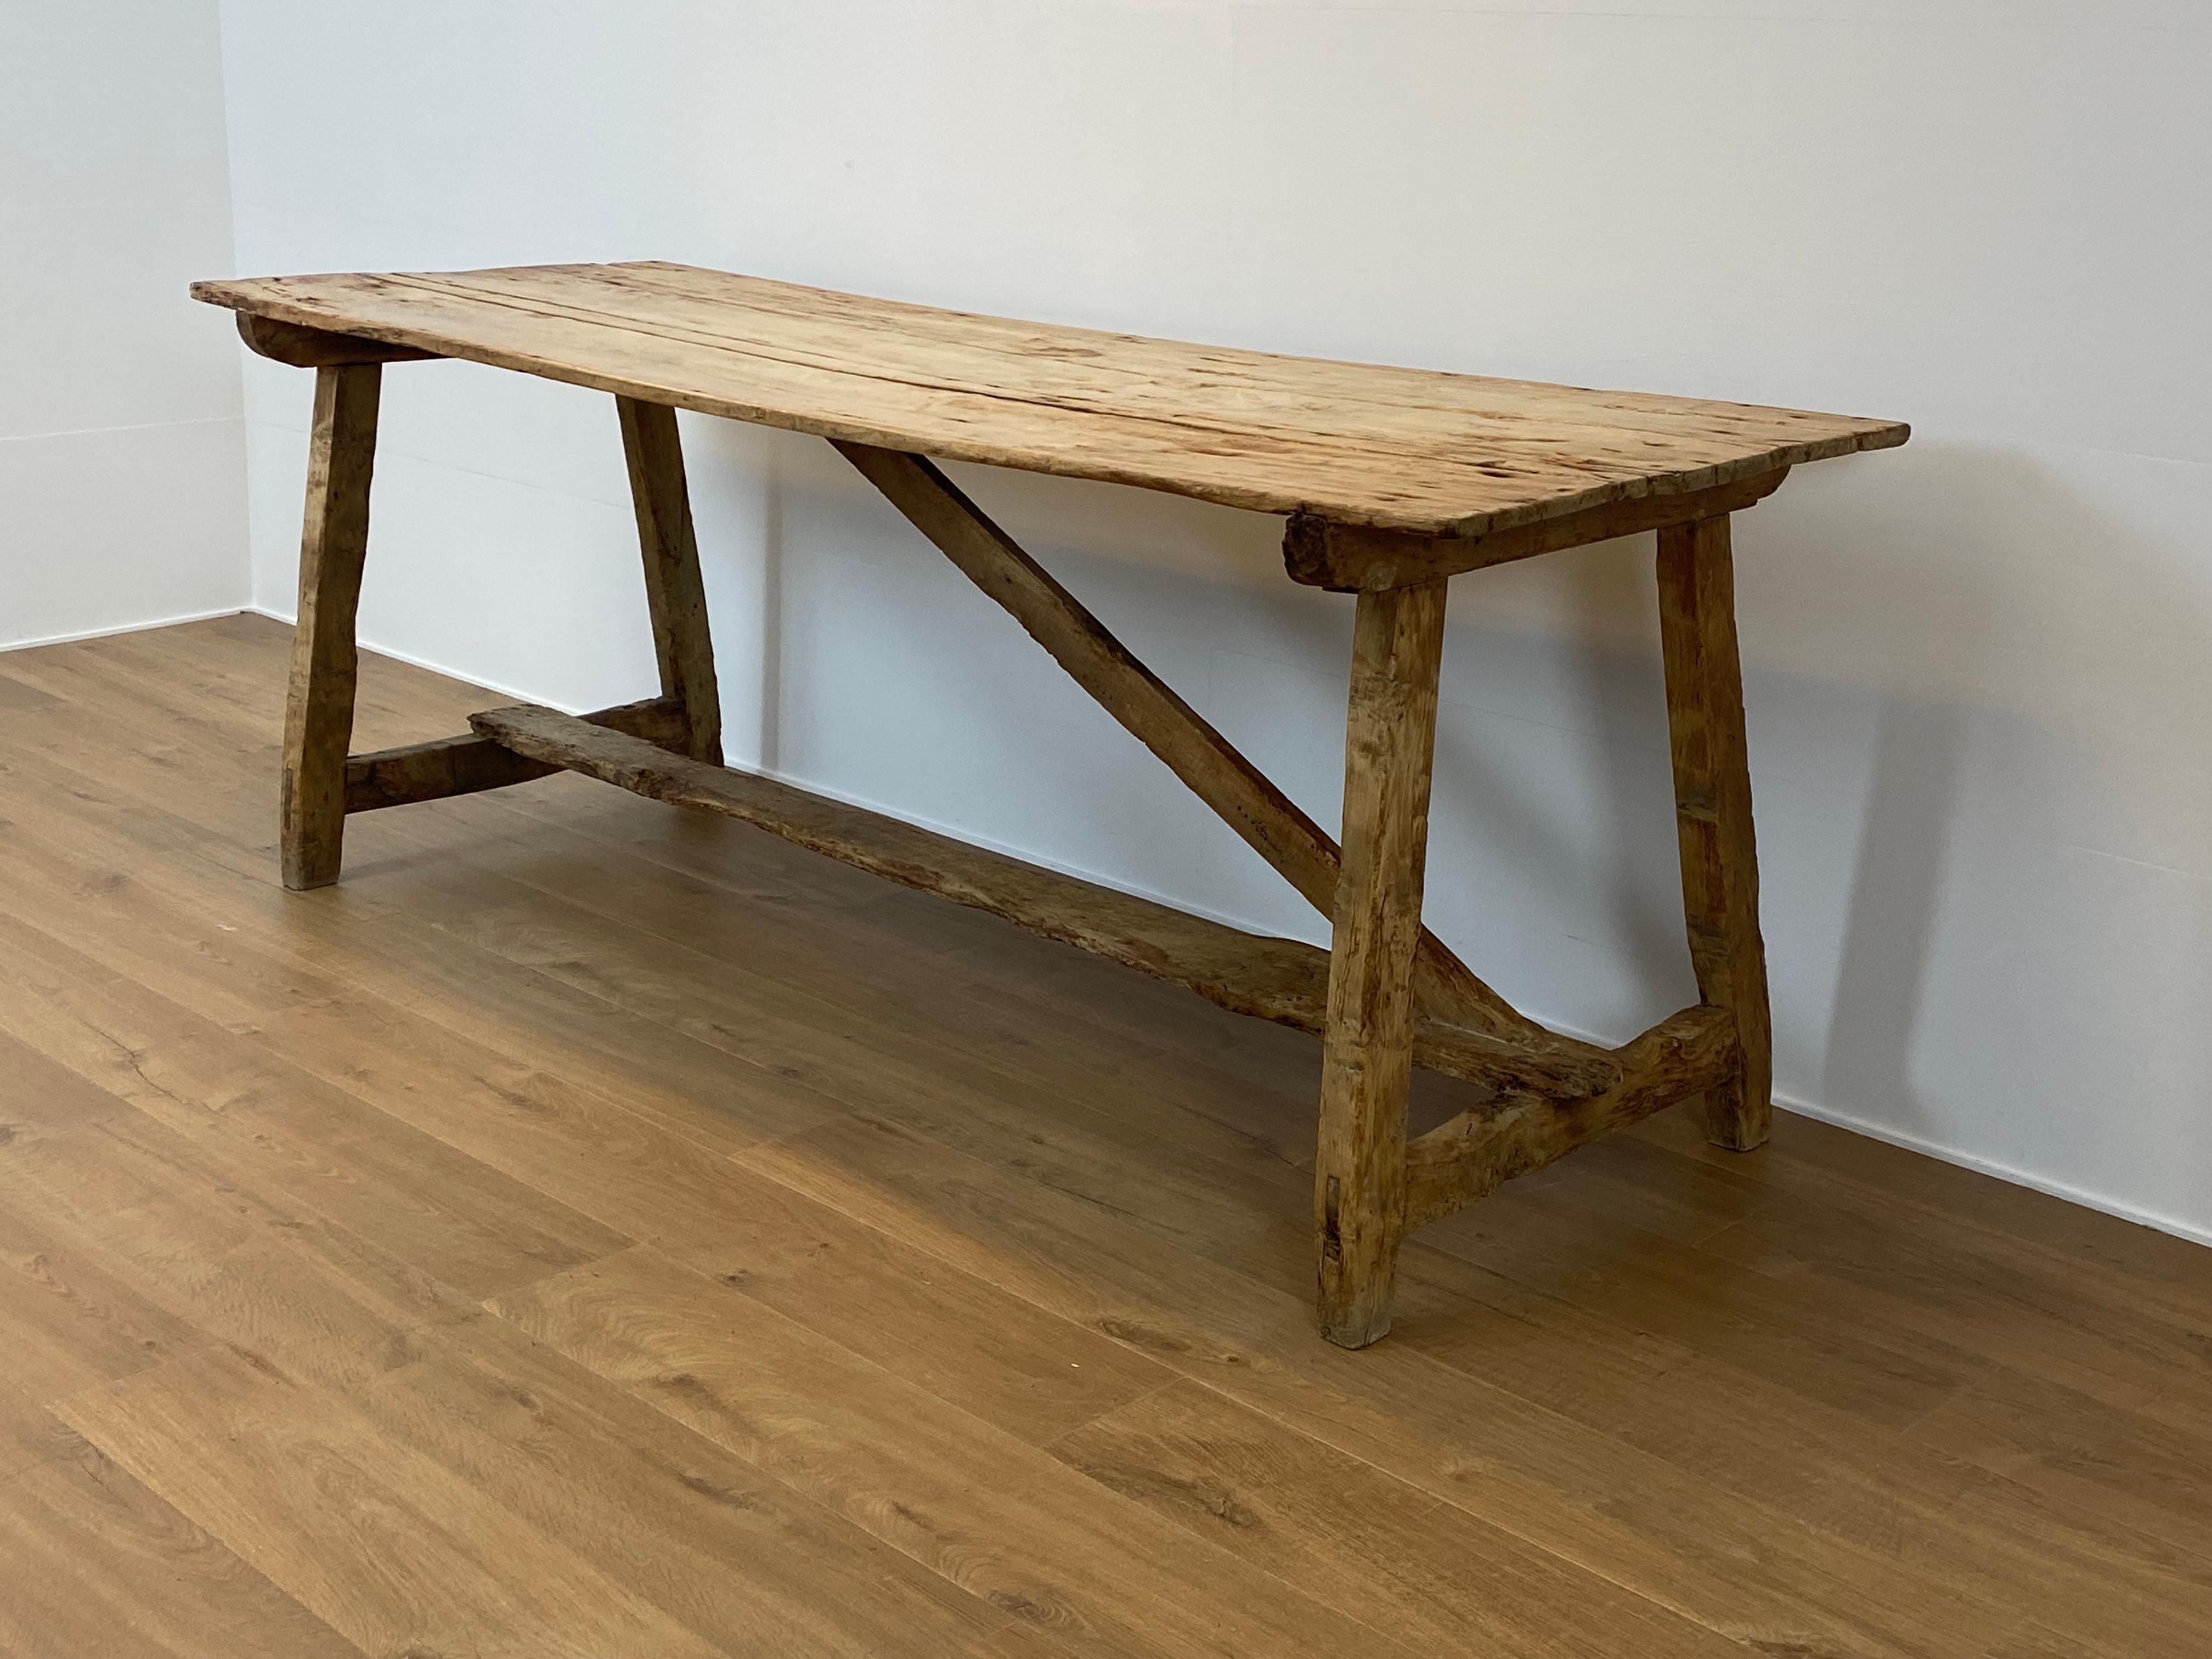 Superb Spanish Farm Table from the Catalan Region from around 1900,
the table has a great Patina and has the perfect characteristics regarding use and wear,
the table has the correct bleached color,
ideal to use in the kitchen or as a working table